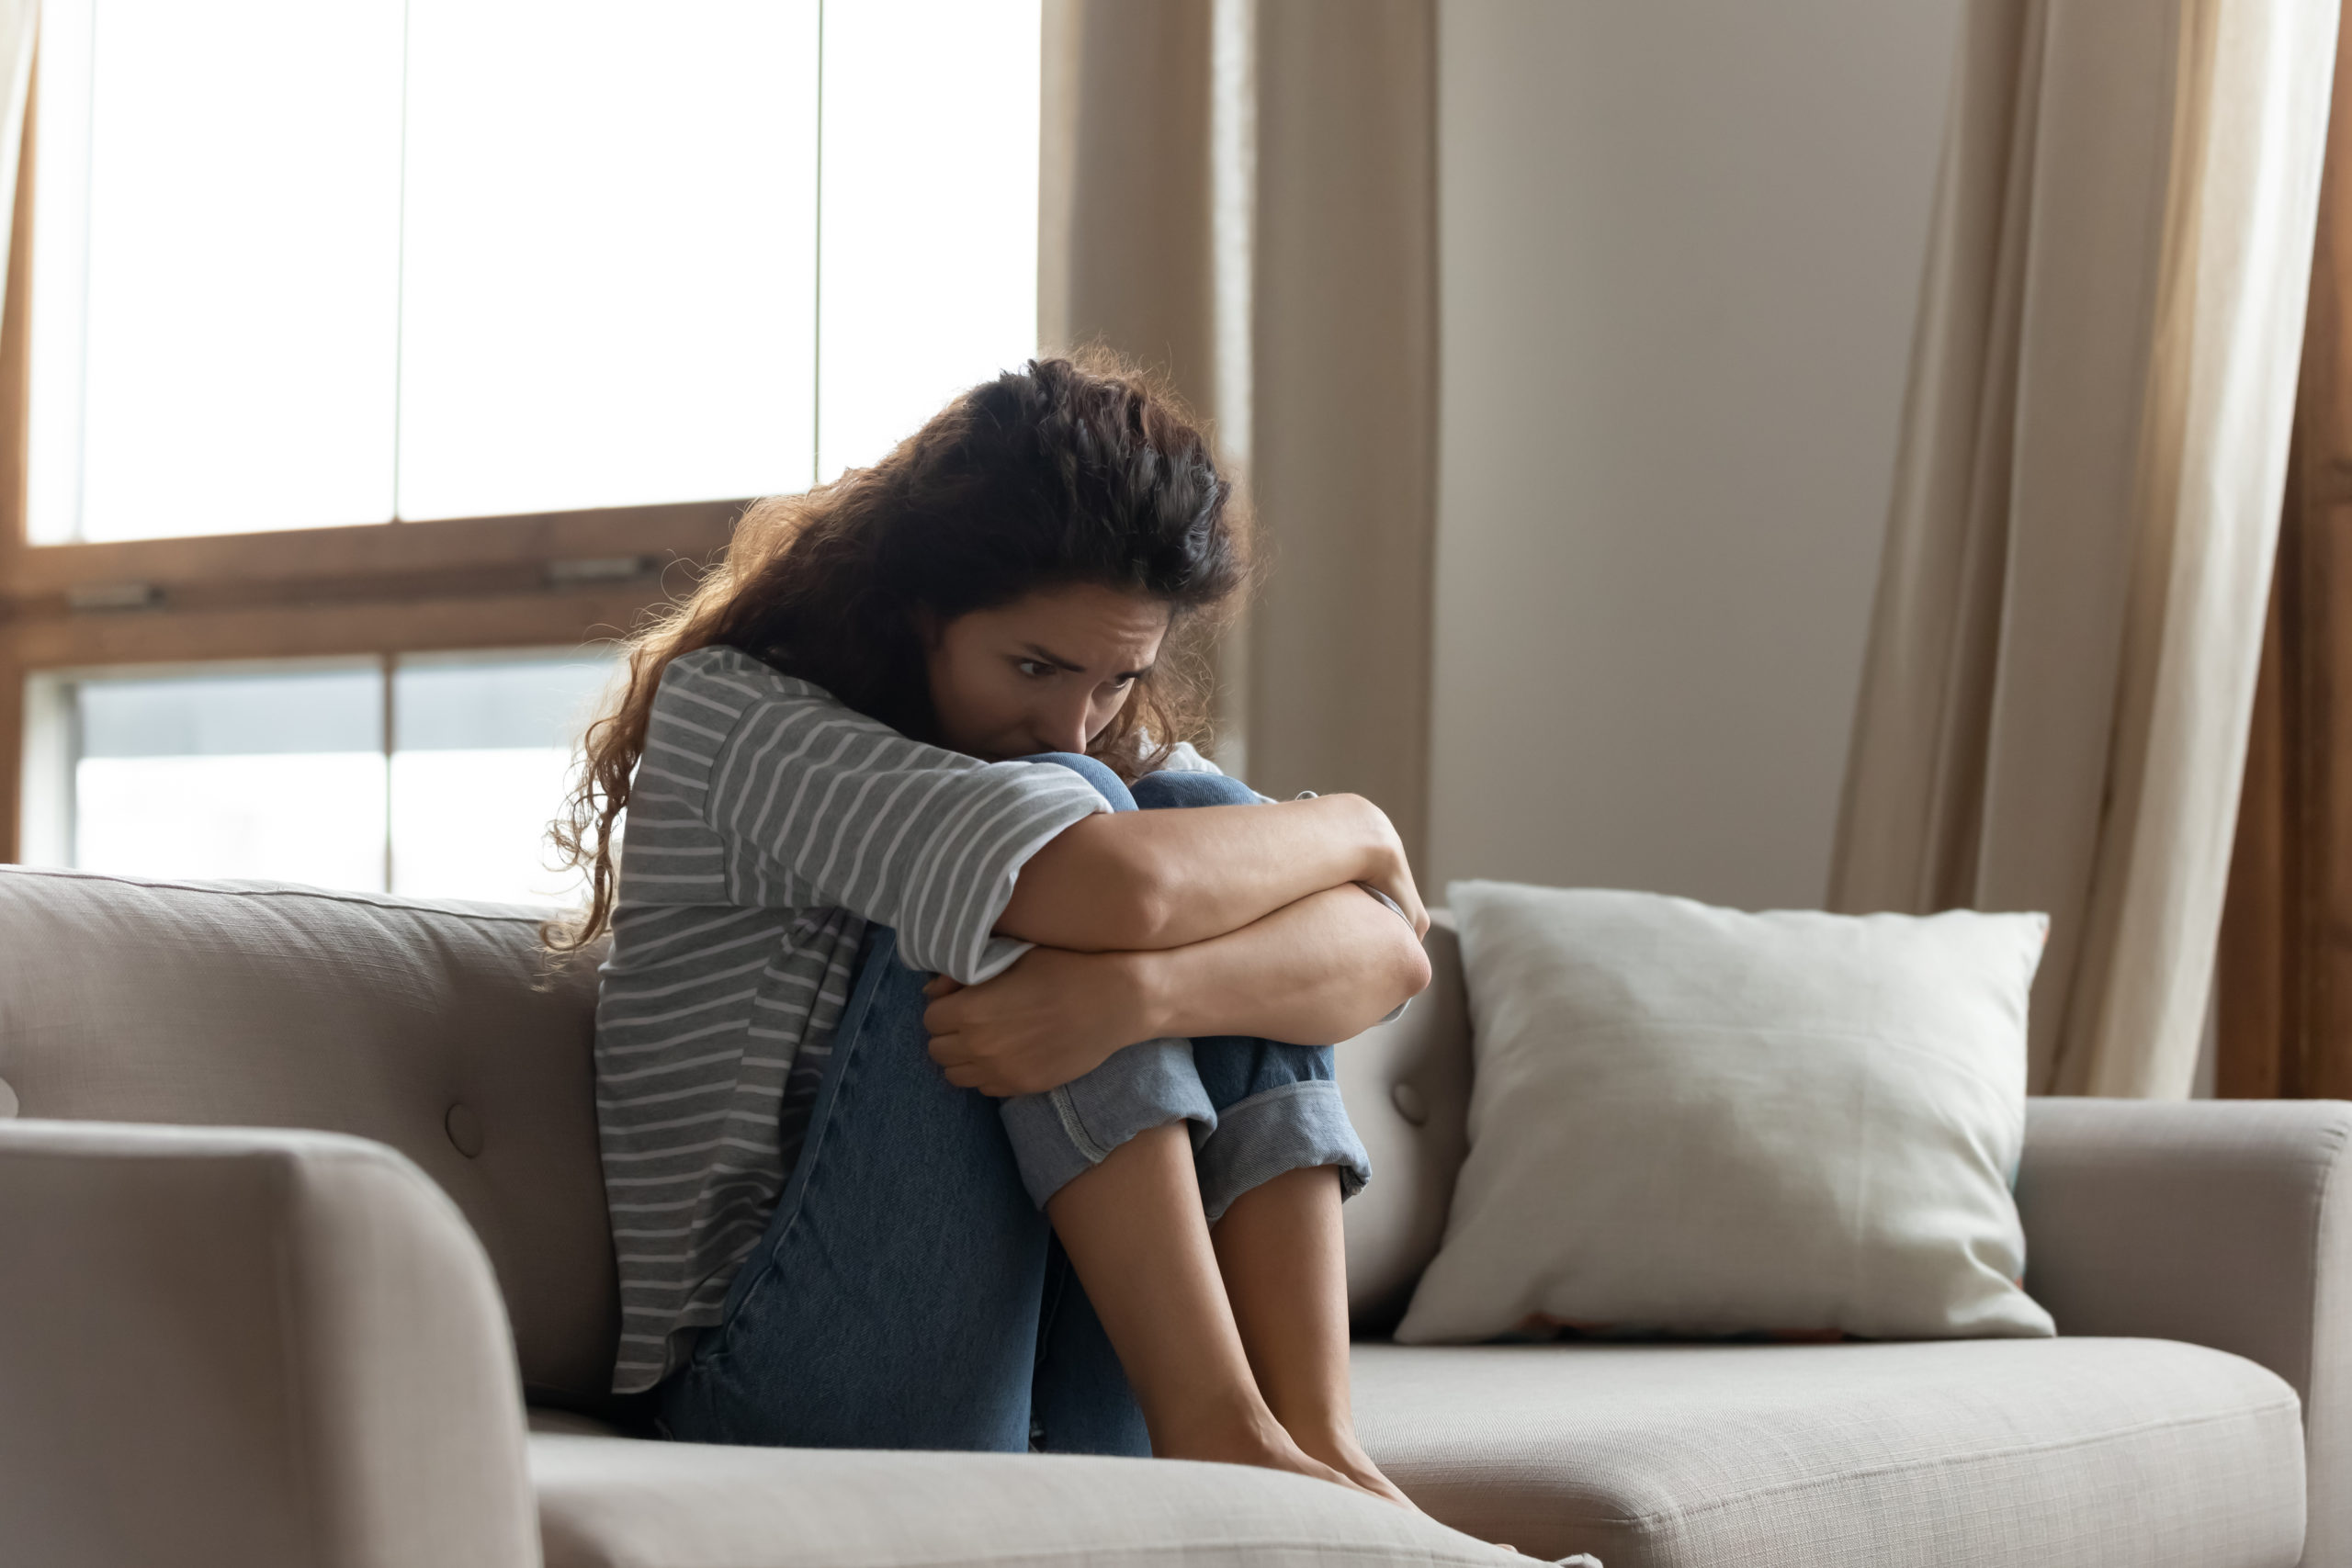 Sad woman hug knees sit on couch feels lonely goes through divorce or break up. Female with drug or alcohol addiction problem need rehab help. Unplanned pregnancy made decision about abortion